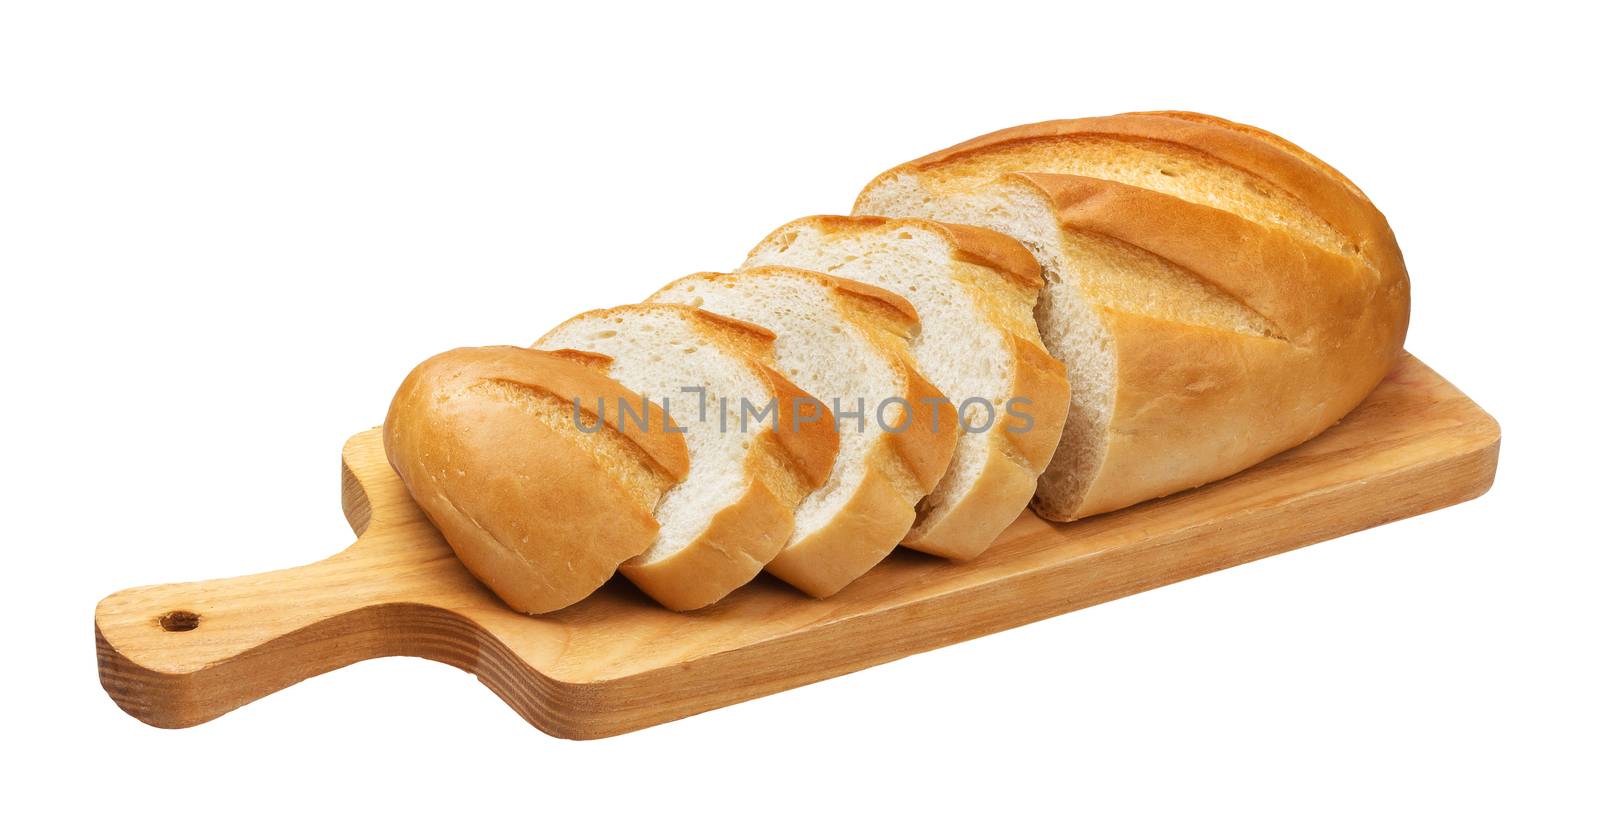 Sliced bread on wooden cutting board isolated on white background with clipping path